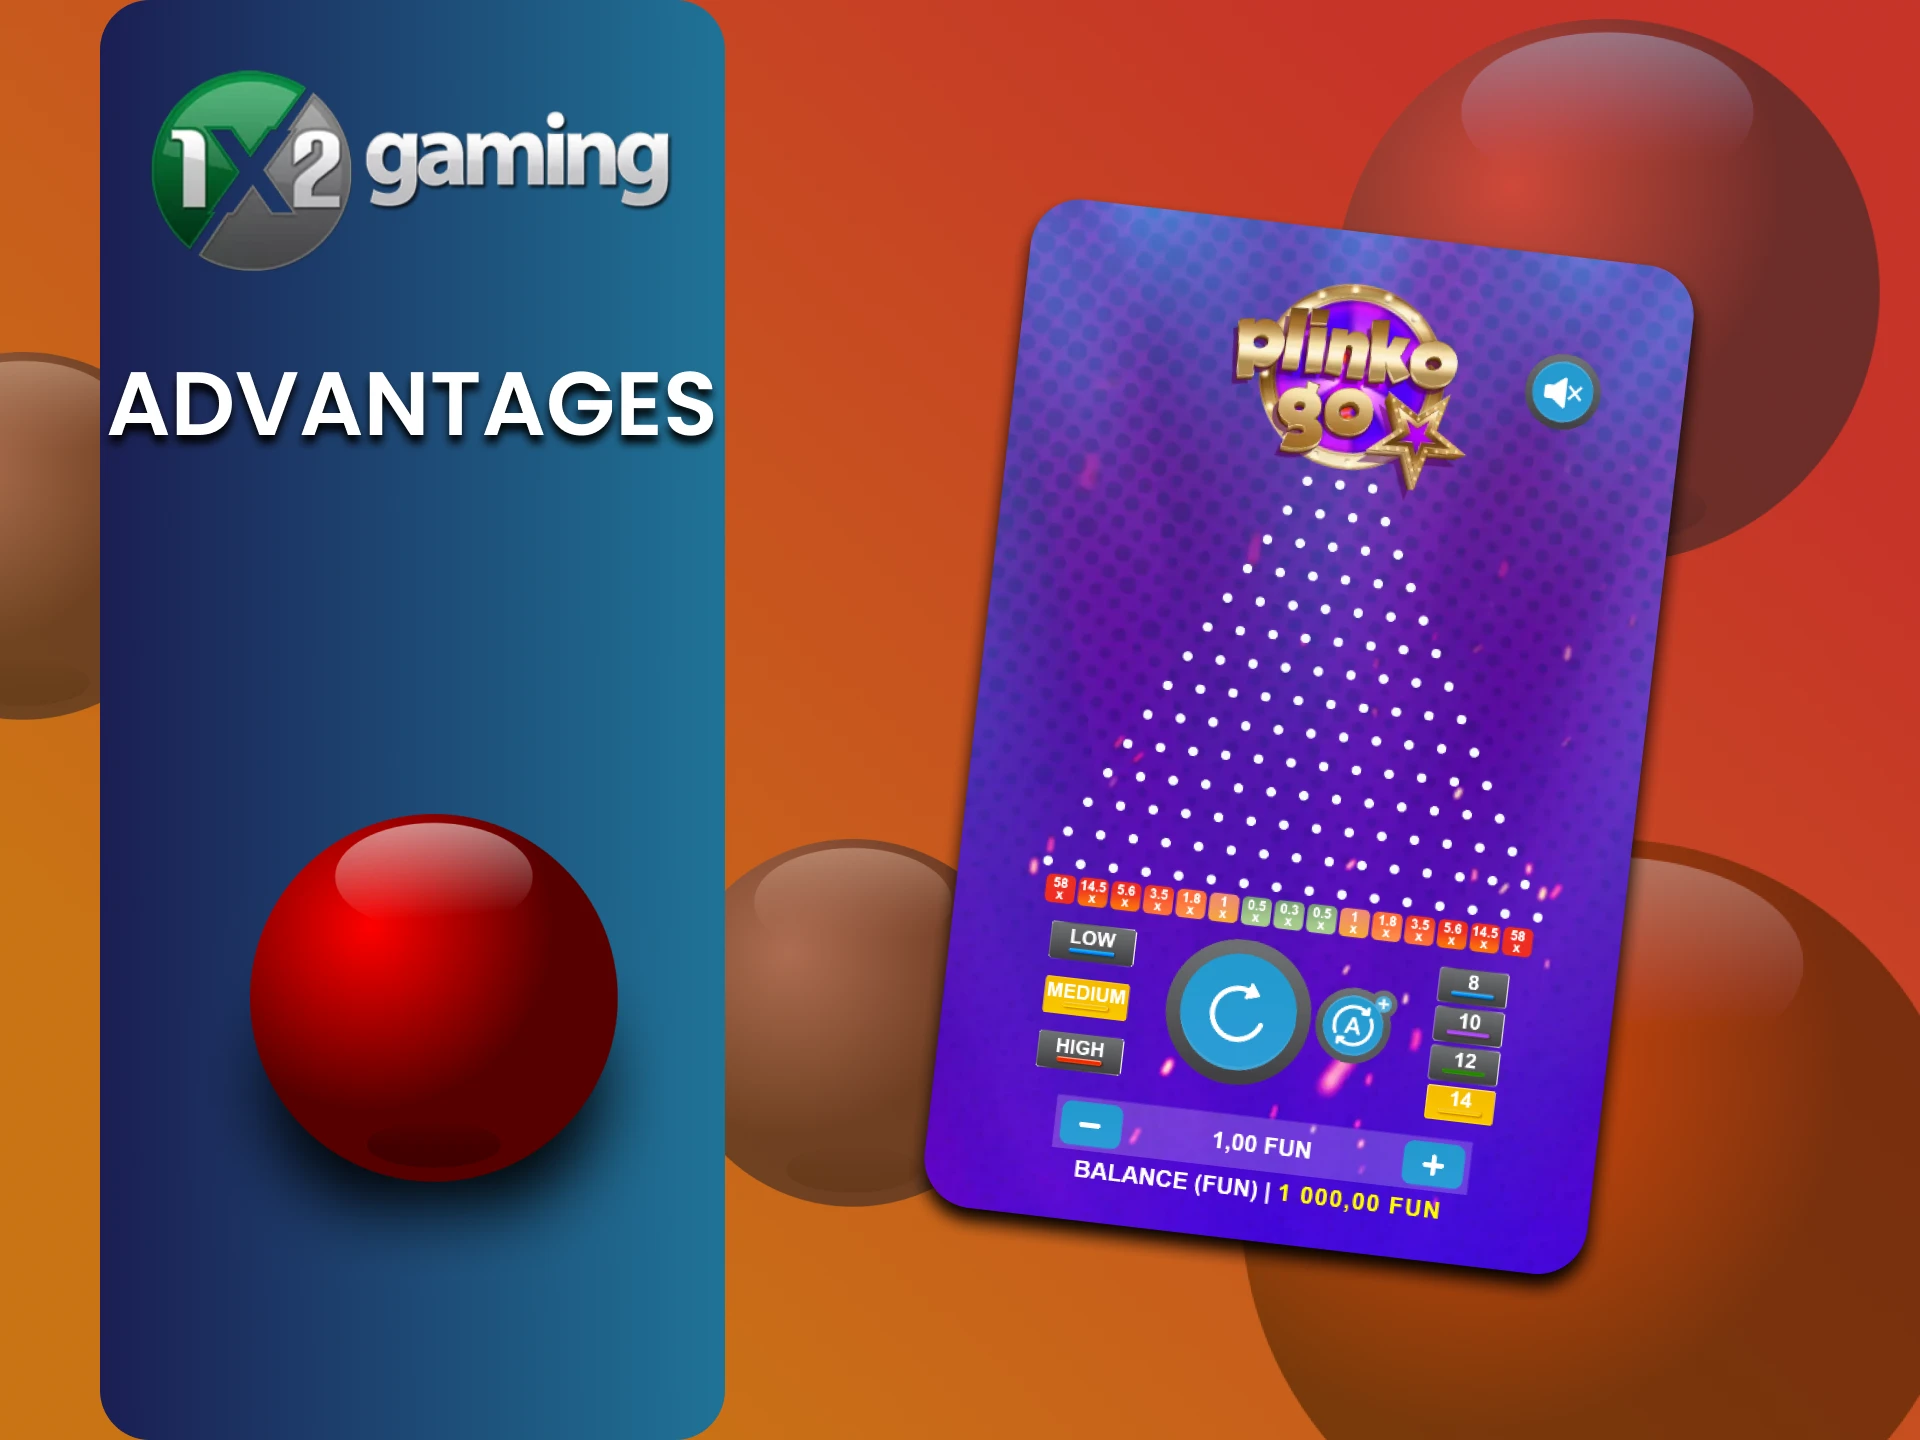 We will tell you about the advantages of the 1x2 gaming provider.